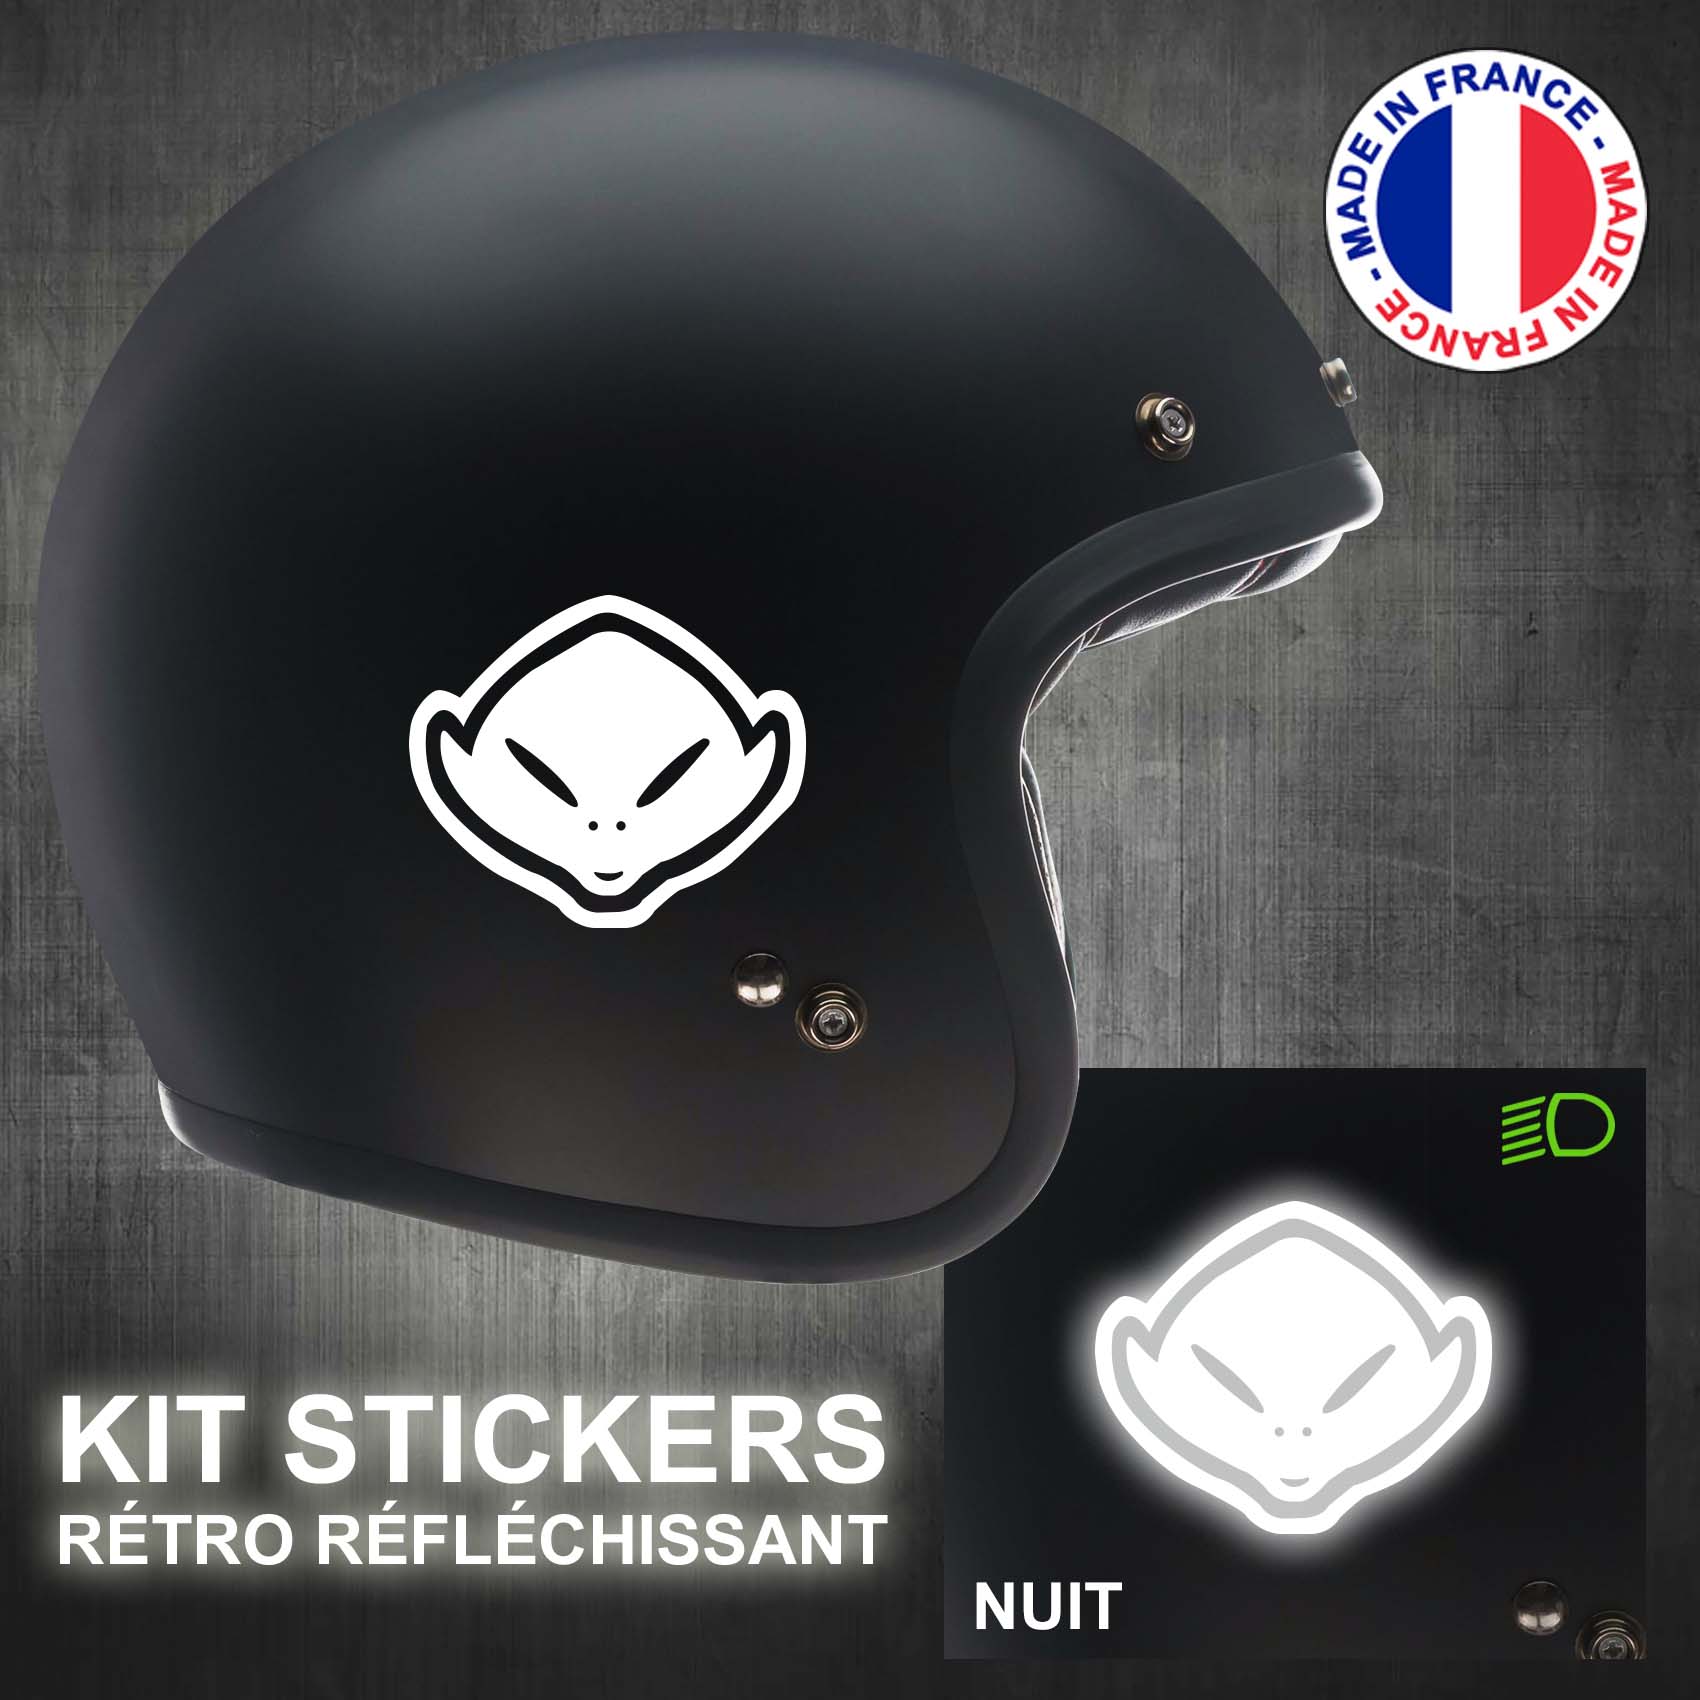 stickers-casque-moto-ufo-ref3-retro-reflechissant-autocollant-noir-moto-velo-tuning-racing-route-sticker-casques-adhesif-scooter-nuit-securite-decals-personnalise-personnalisable-min